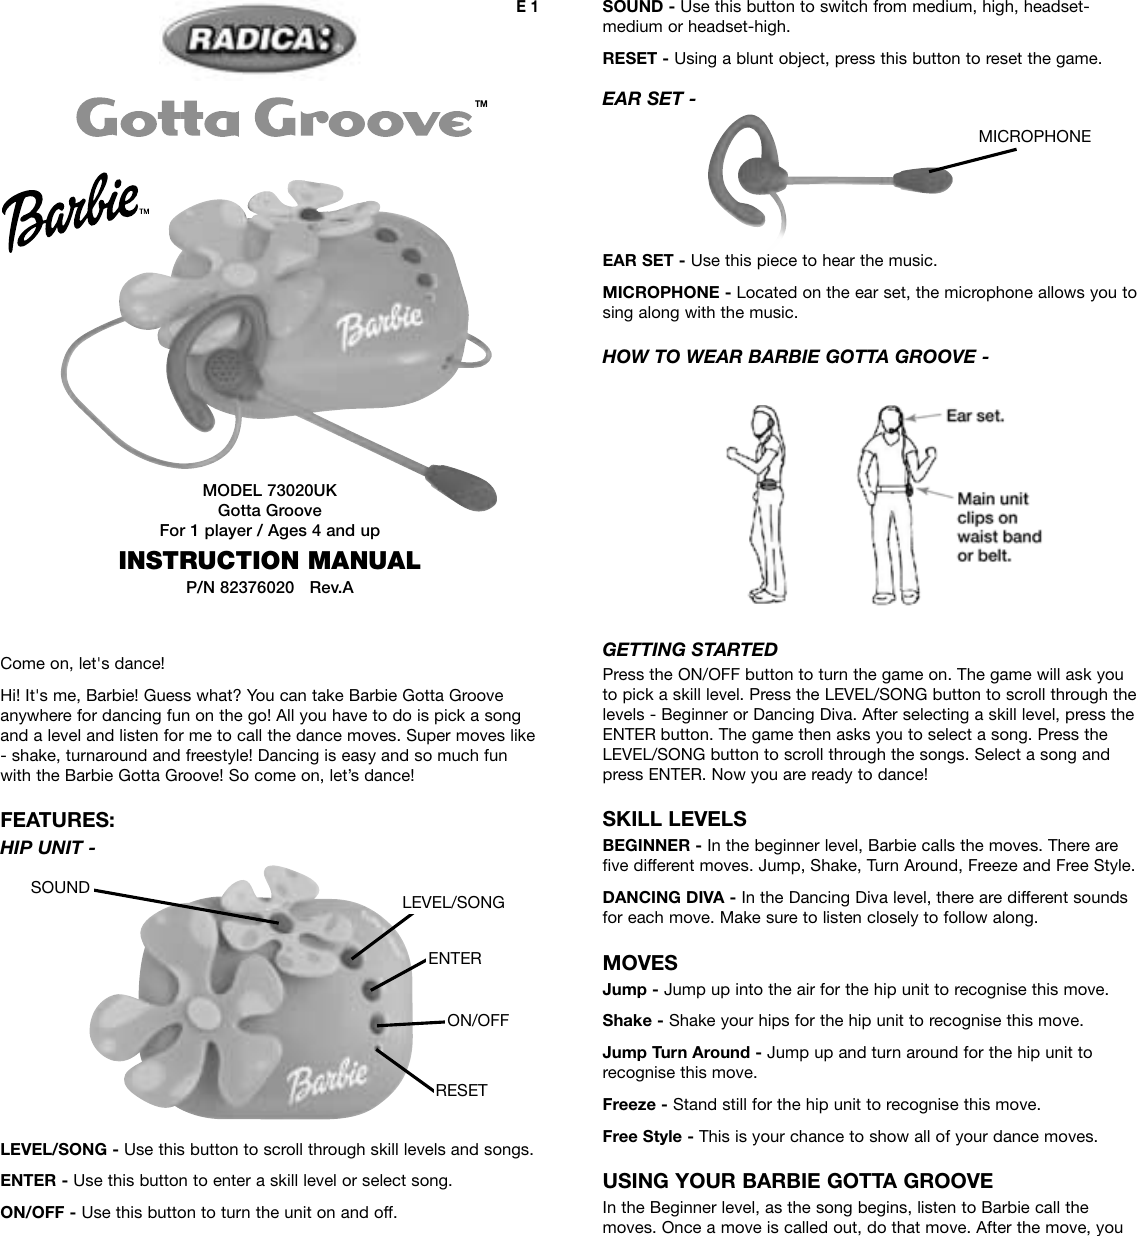 barbie games page 1